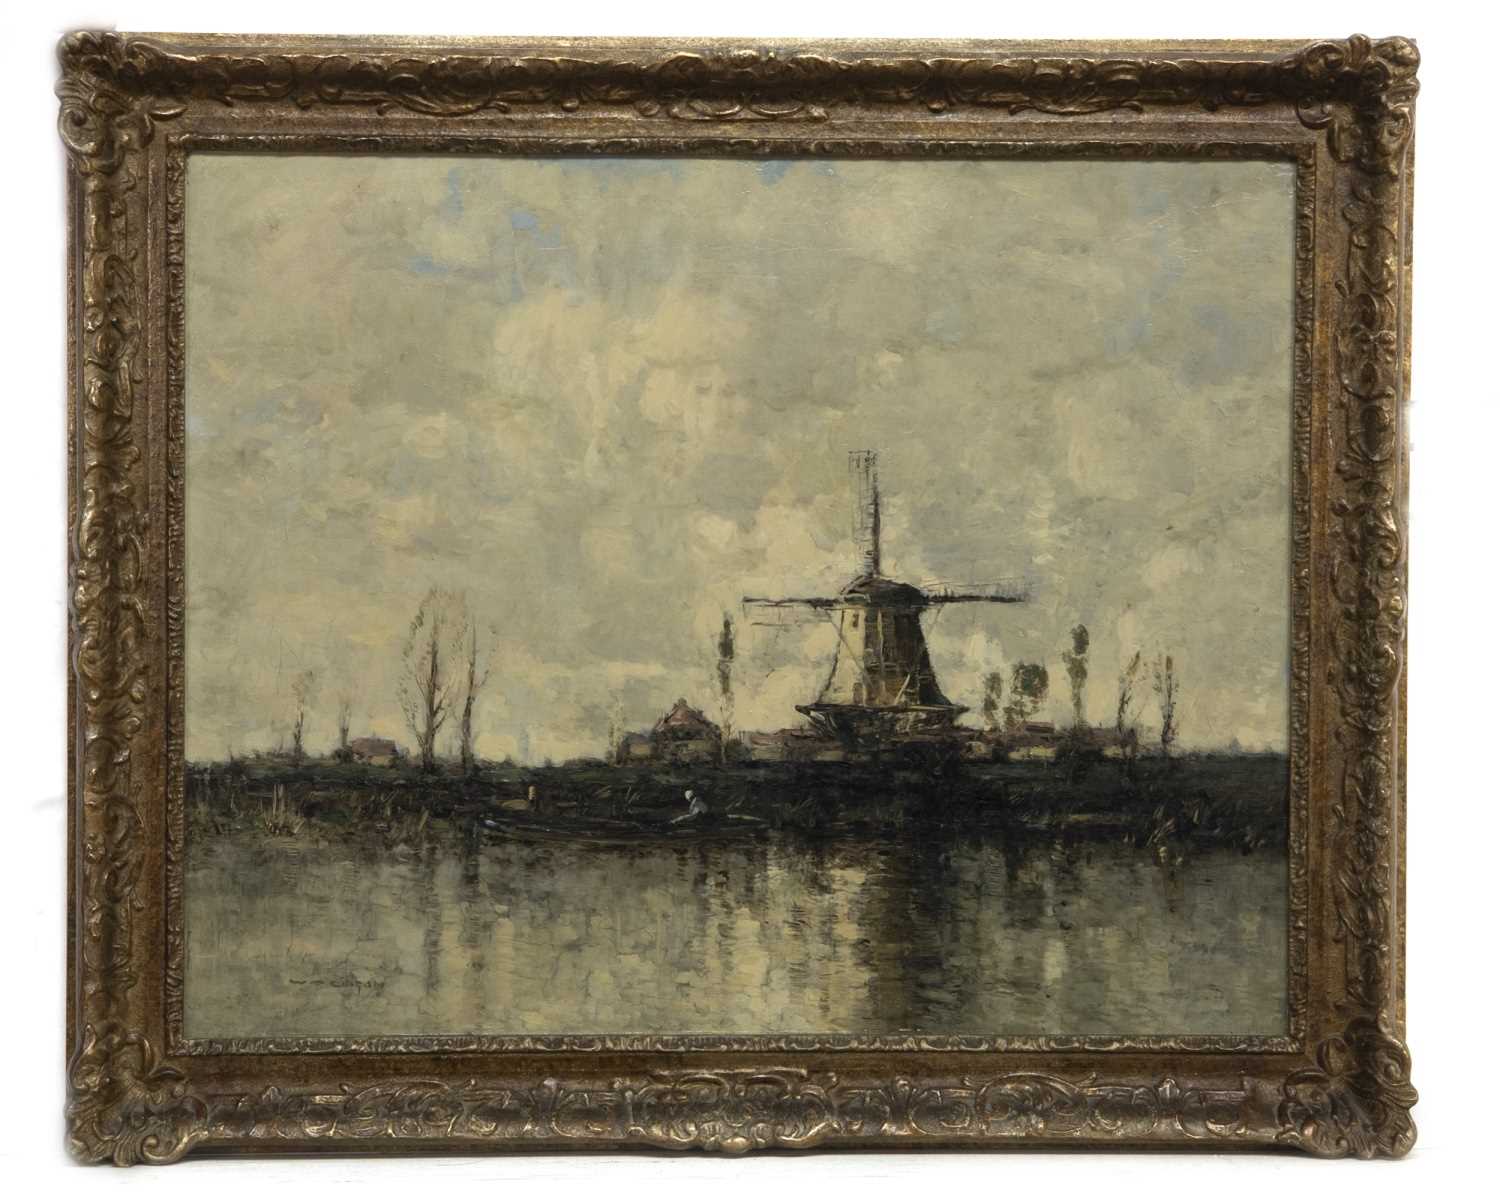 Lot 347 - DUTCH RIVER SCENE AND WINDMILL, AN OIL BY WILLIAM ALFRED GIBSON